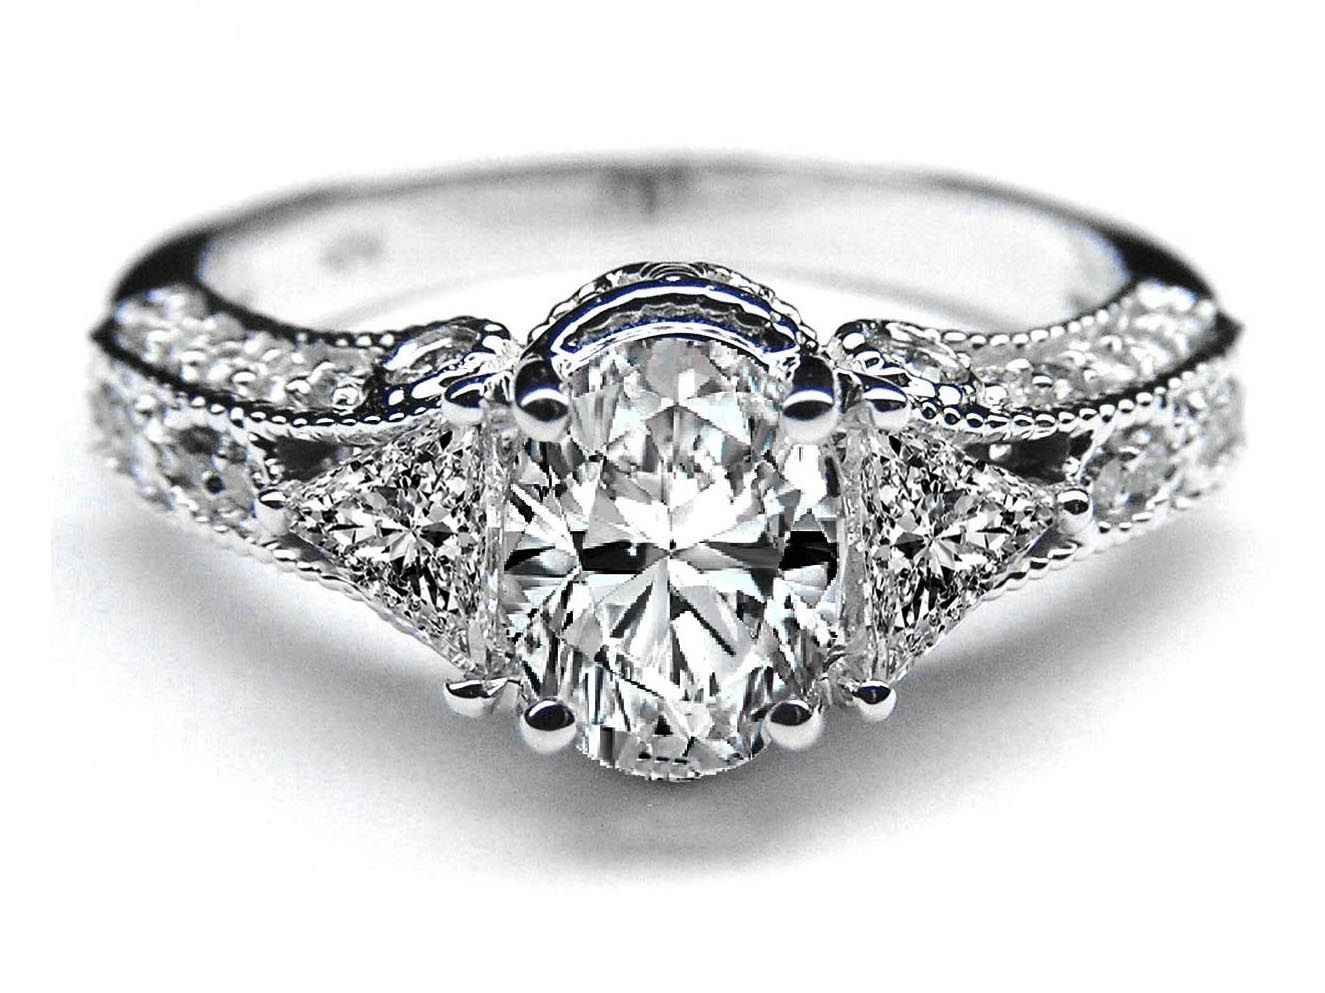 Amazing Vintage Style Engagement Rings With Antique Diamond Rings With Regard To 2018 Diamond Vintage Style Engagement Rings (View 1 of 15)